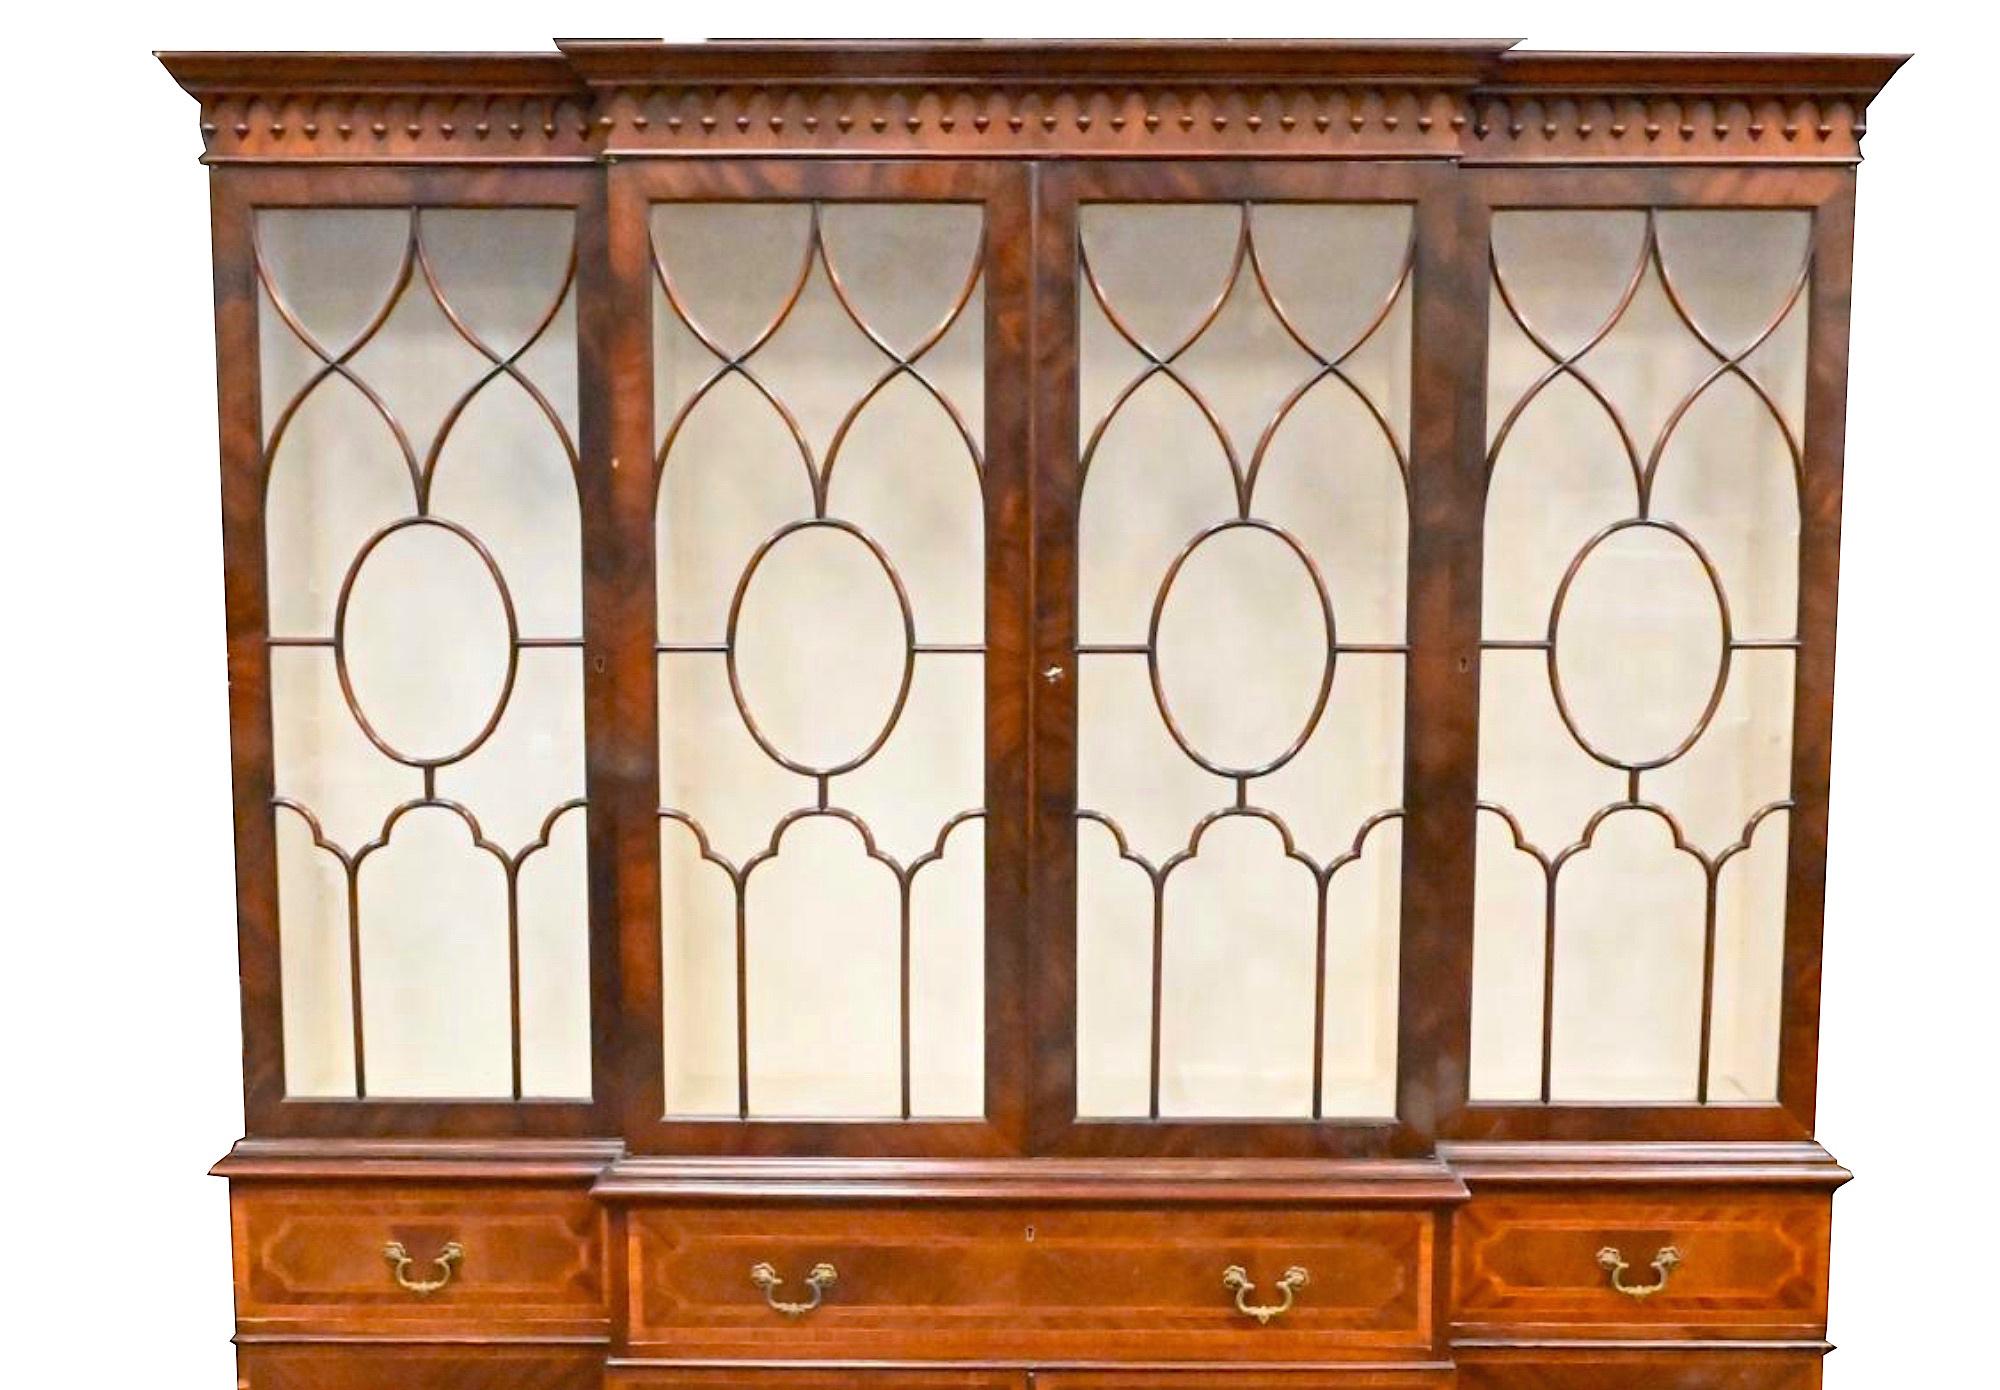 Enhance your home's elegance with this Beautifully Crafted Two-Part Burl Mahogany Carved Wood China Display Cabinet or Bookcase, a piece of furniture that marries sophistication and functionality. The upper part of this magnificent cabinet features